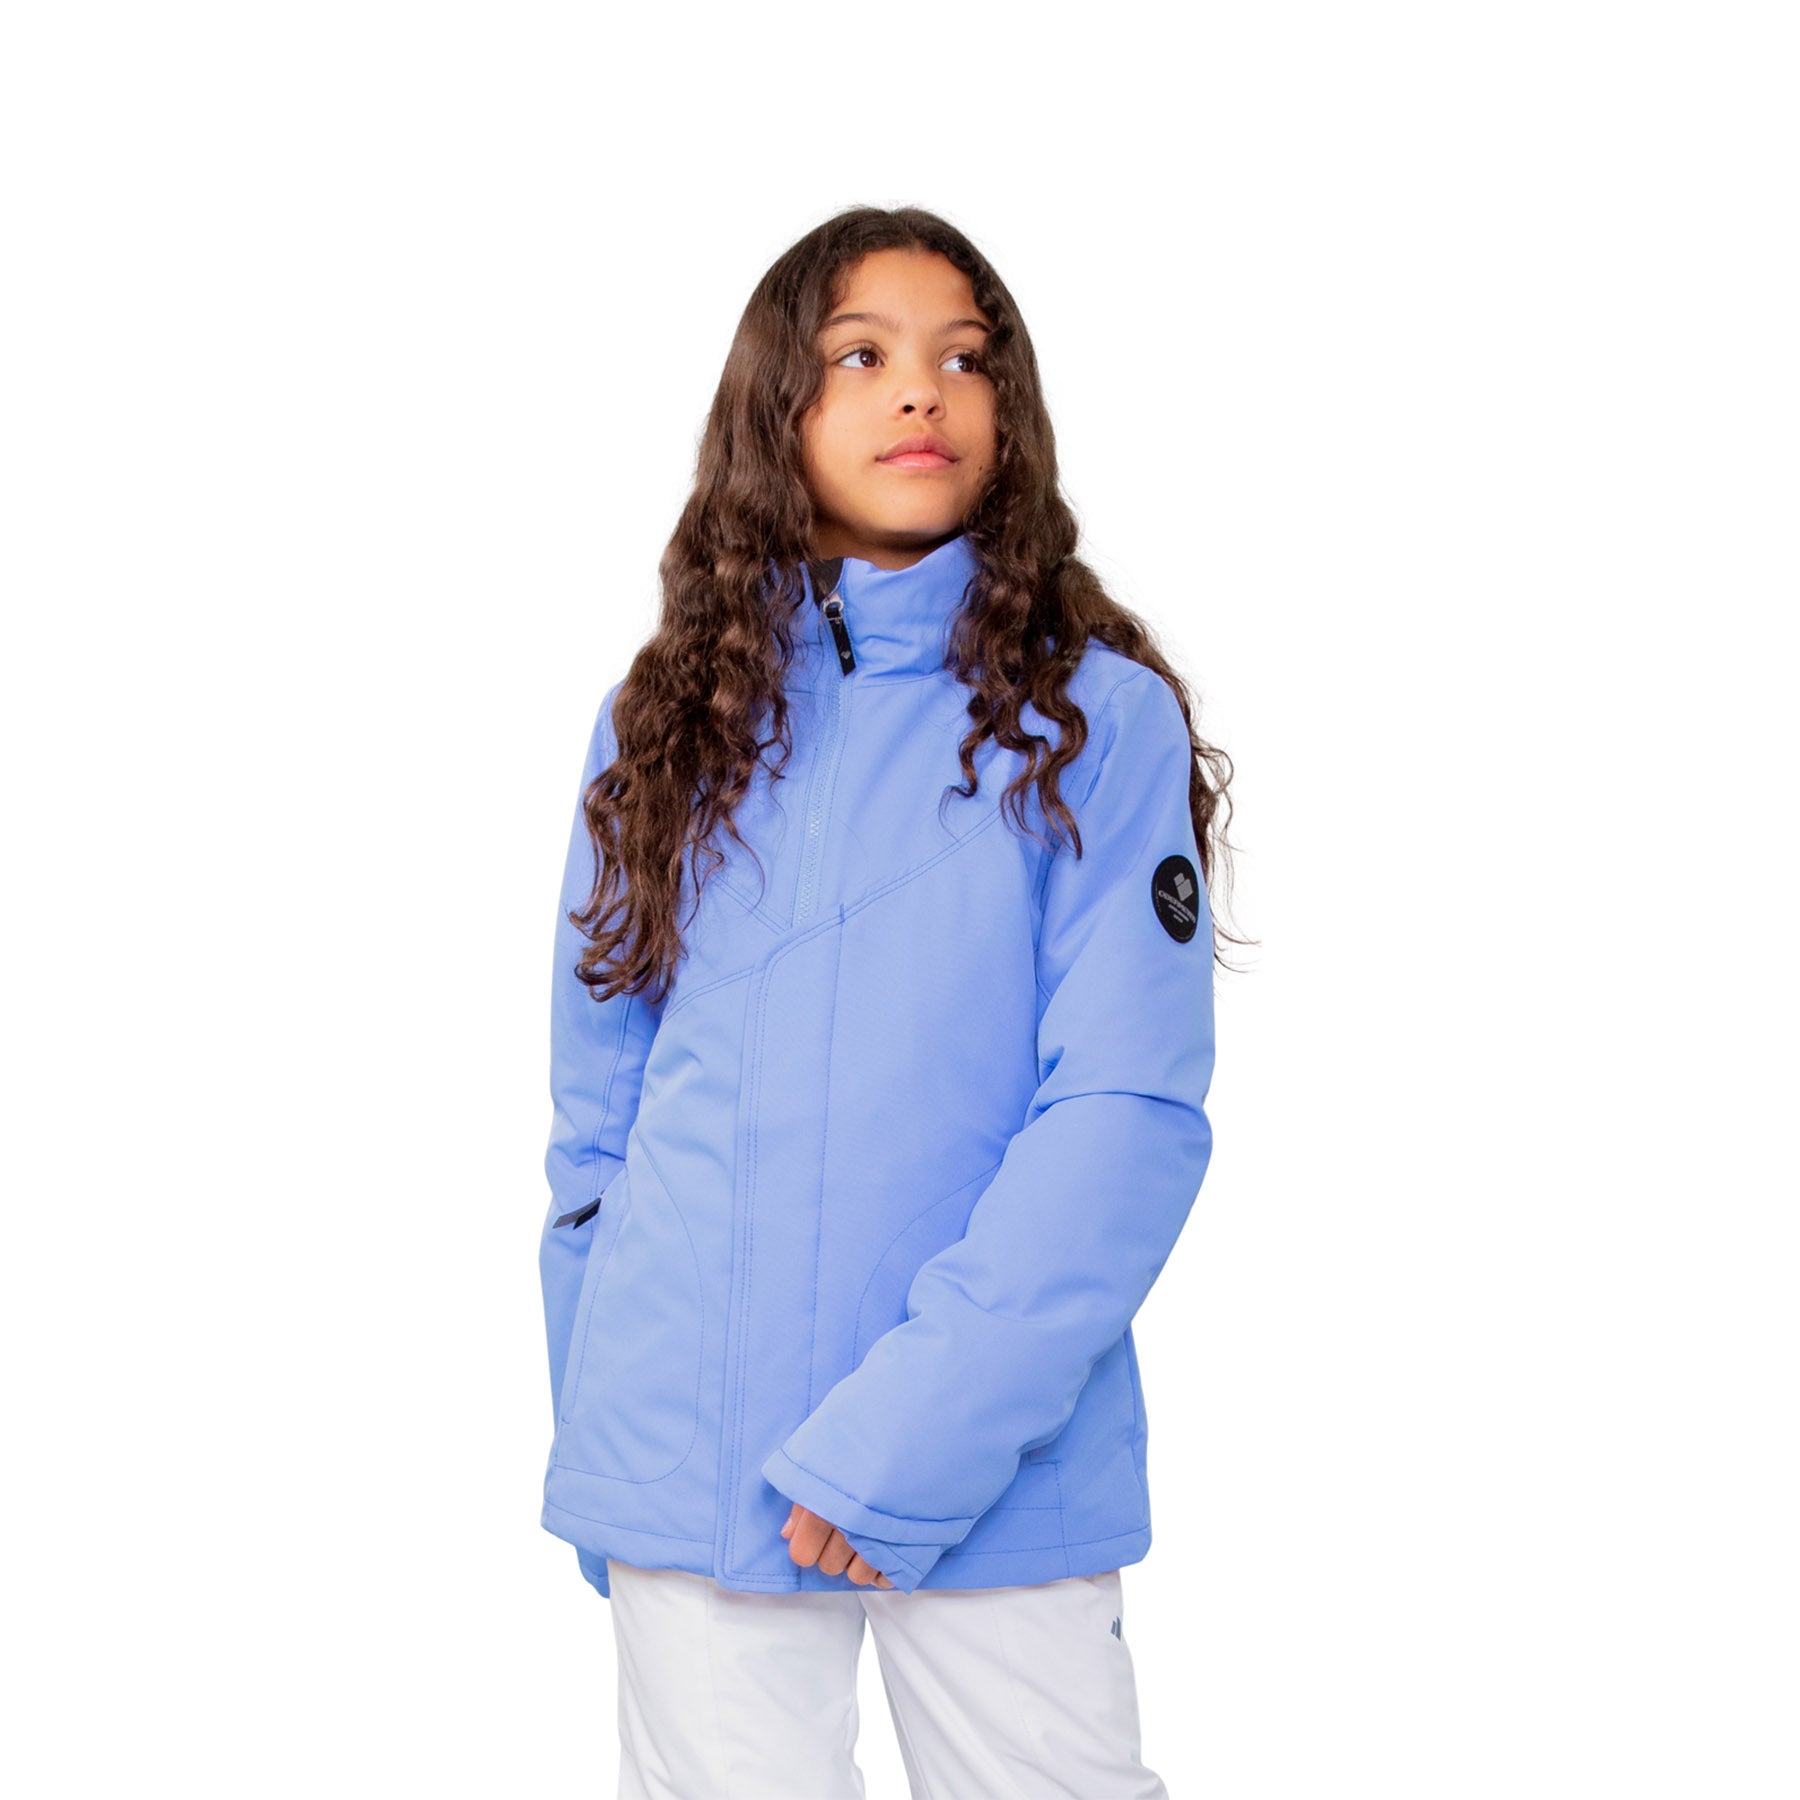 Image features a female model wearing the Obermeyer girls Rylee Jacket in Vinca light purple with white ski pants.